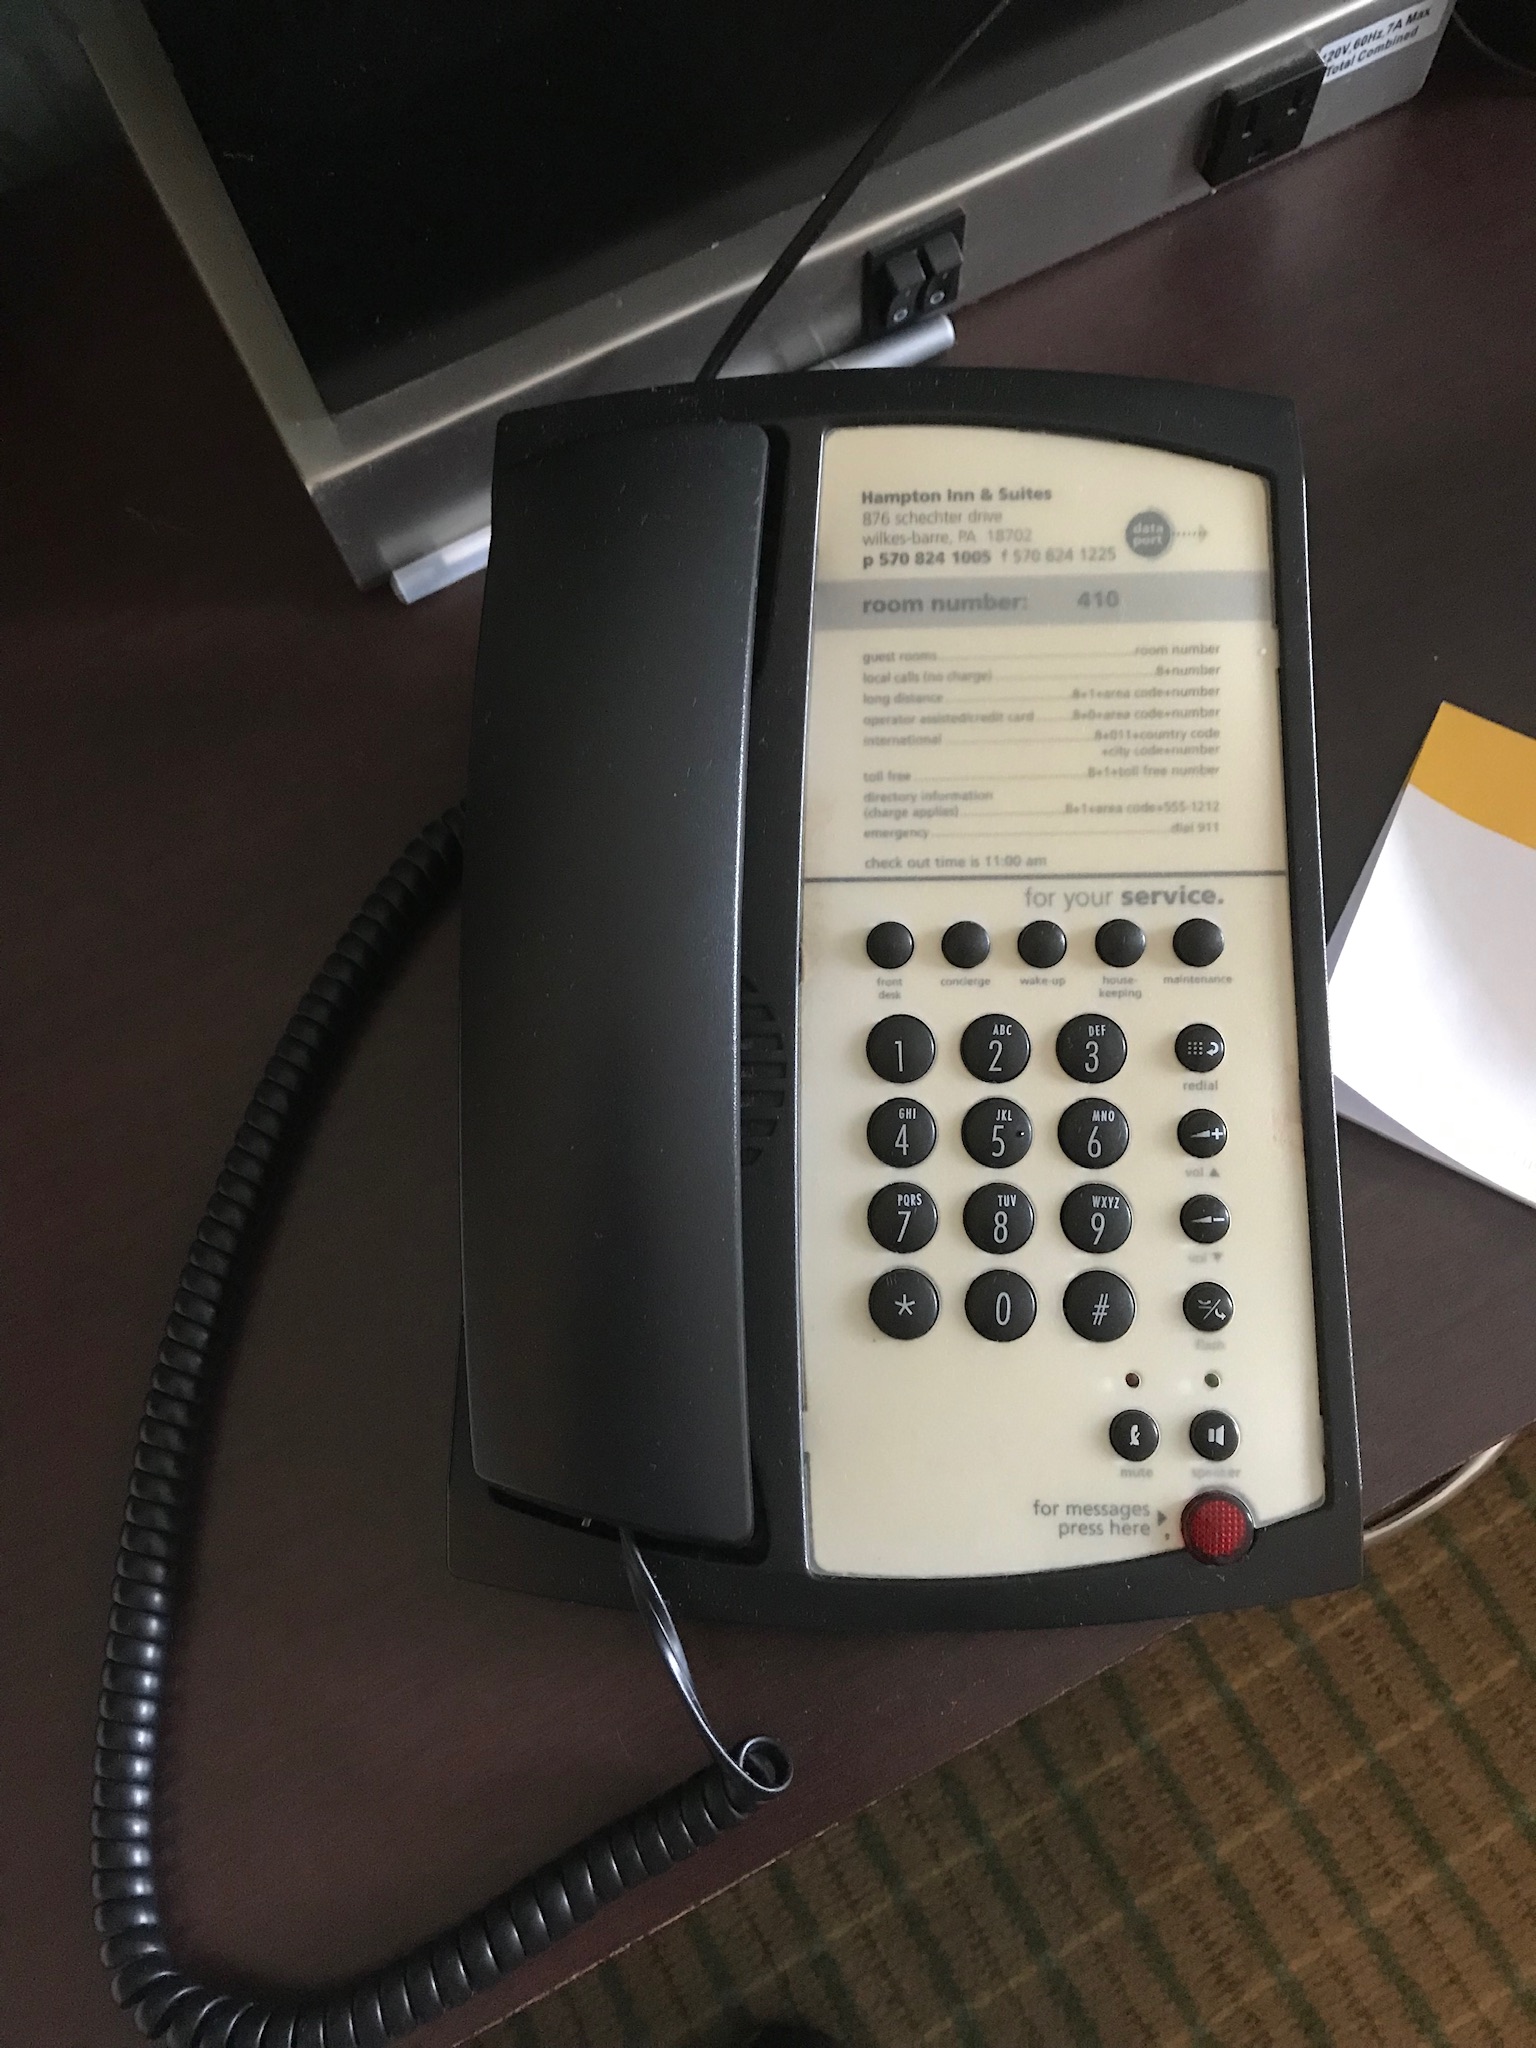 The phone in my hotel room.  Photo taken by and the property of FourWalls.